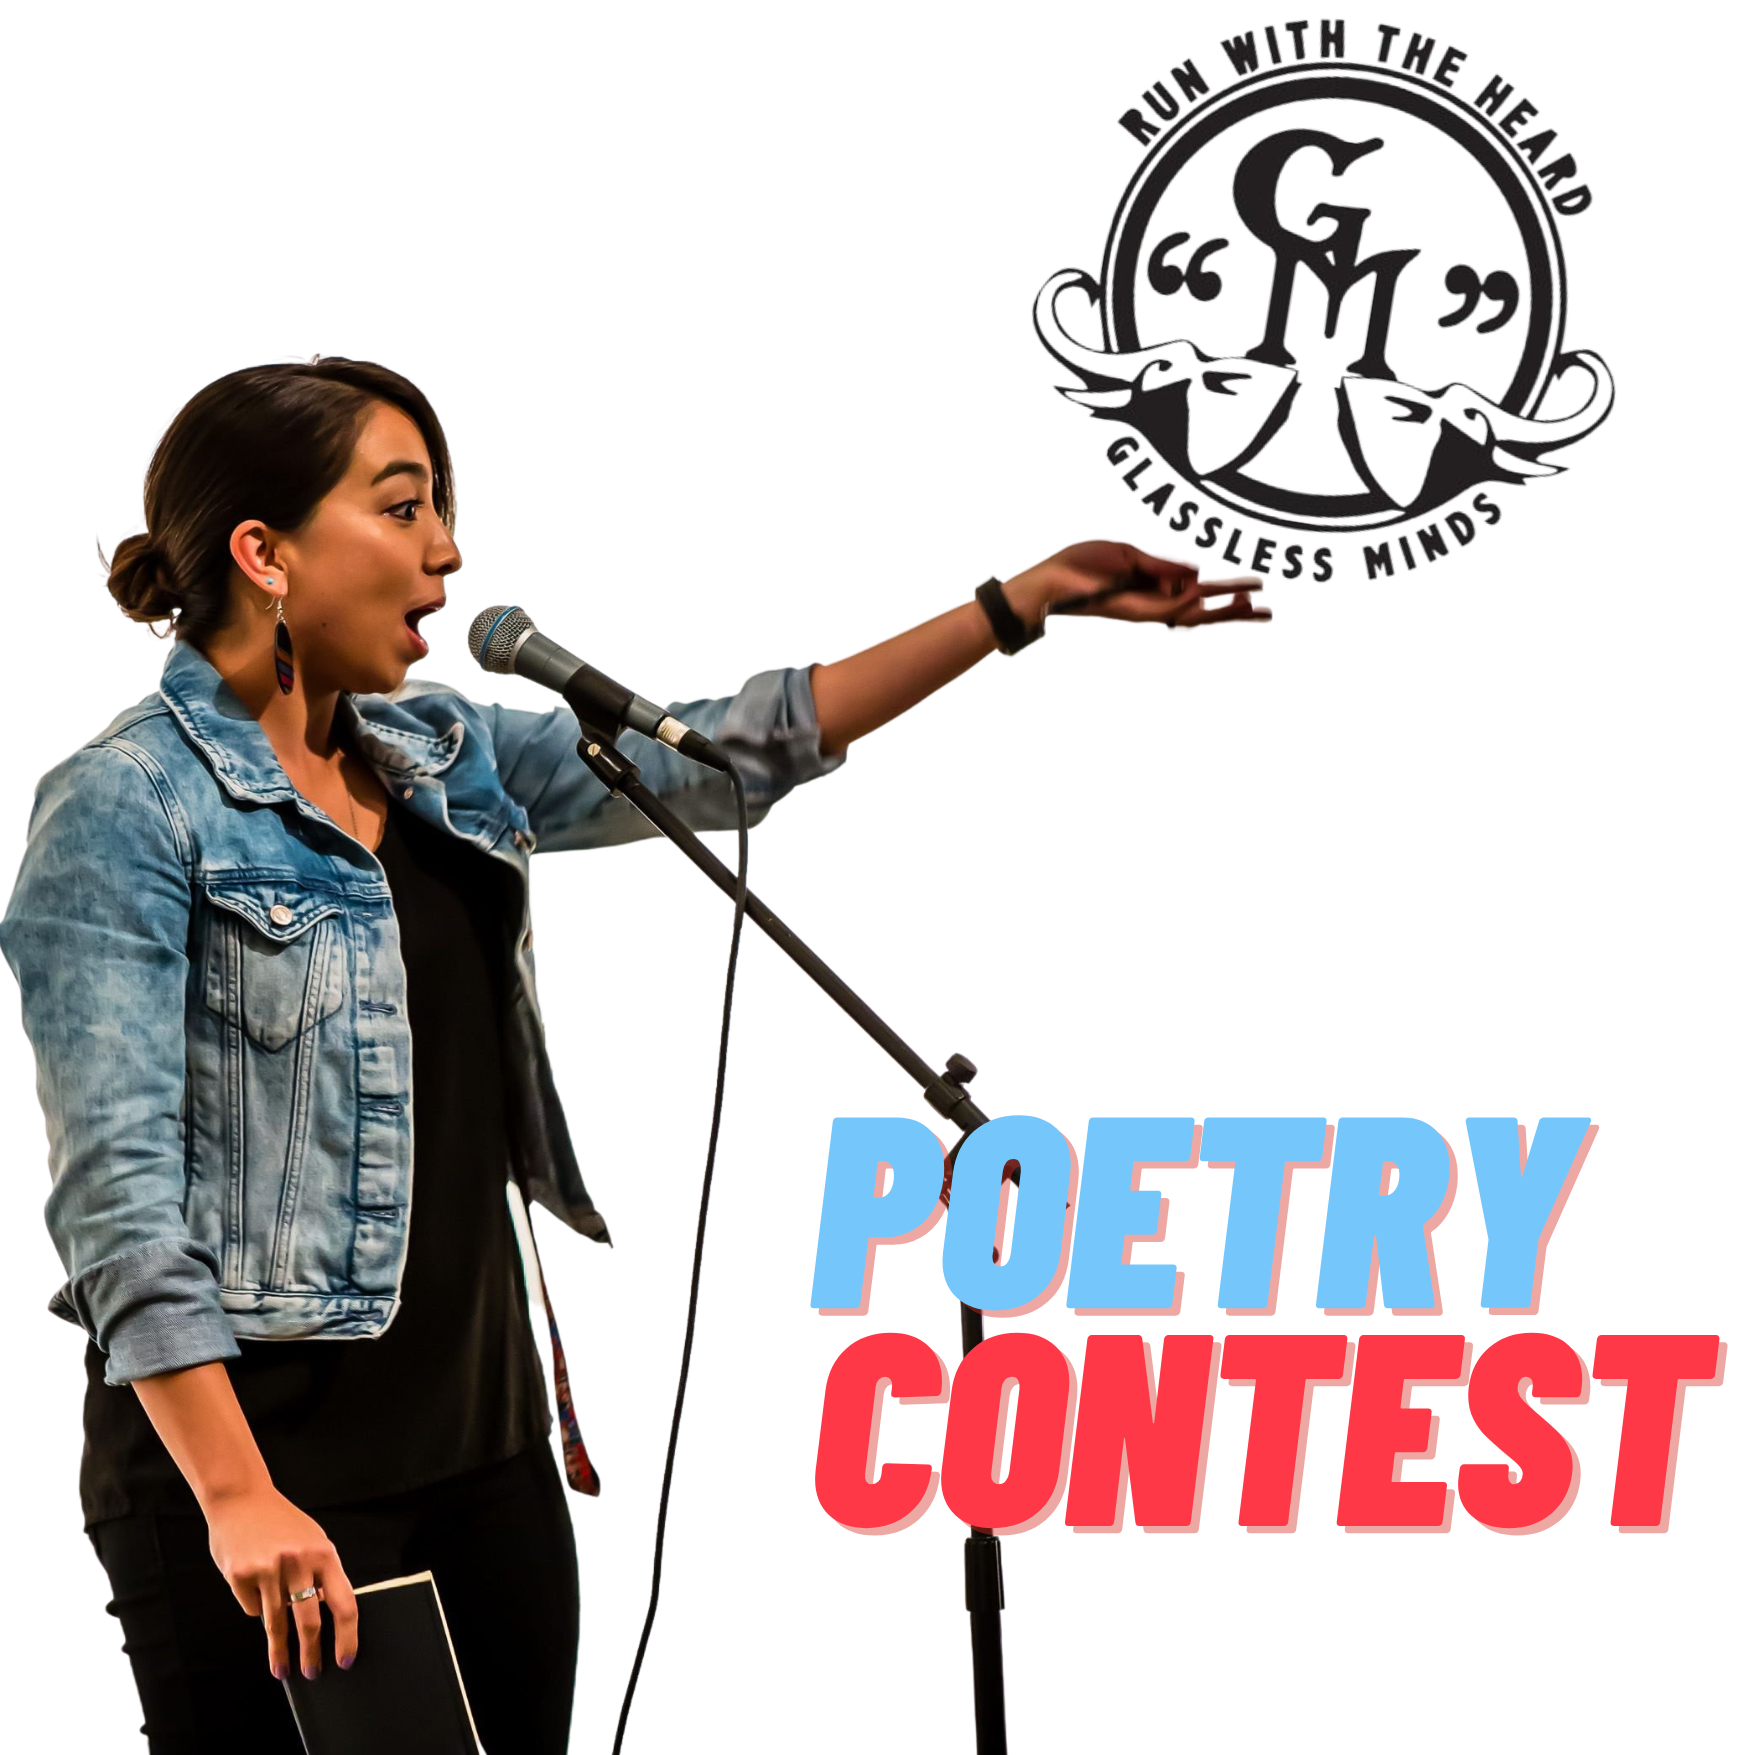 poet staing with lifted arm with glassless minds logo and text that reads poetry contest